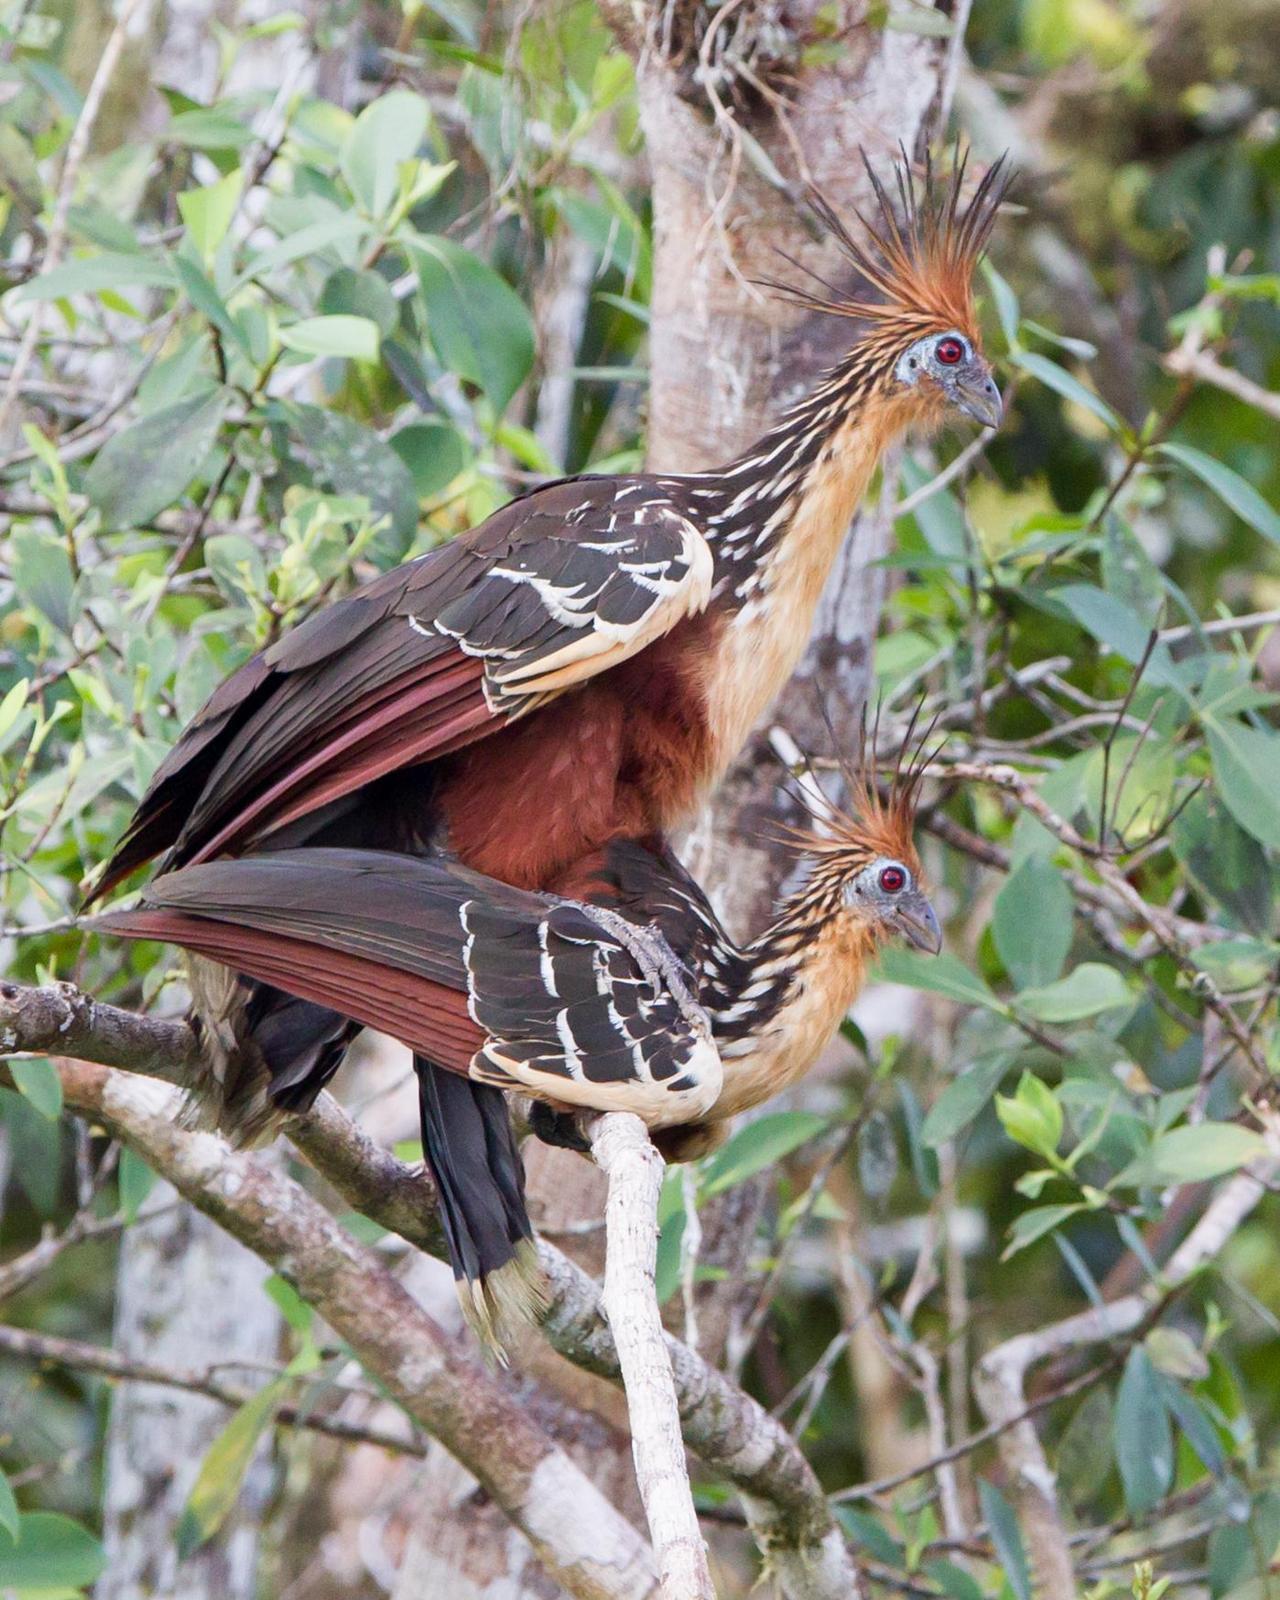 Hoatzin Photo by Kevin Berkoff